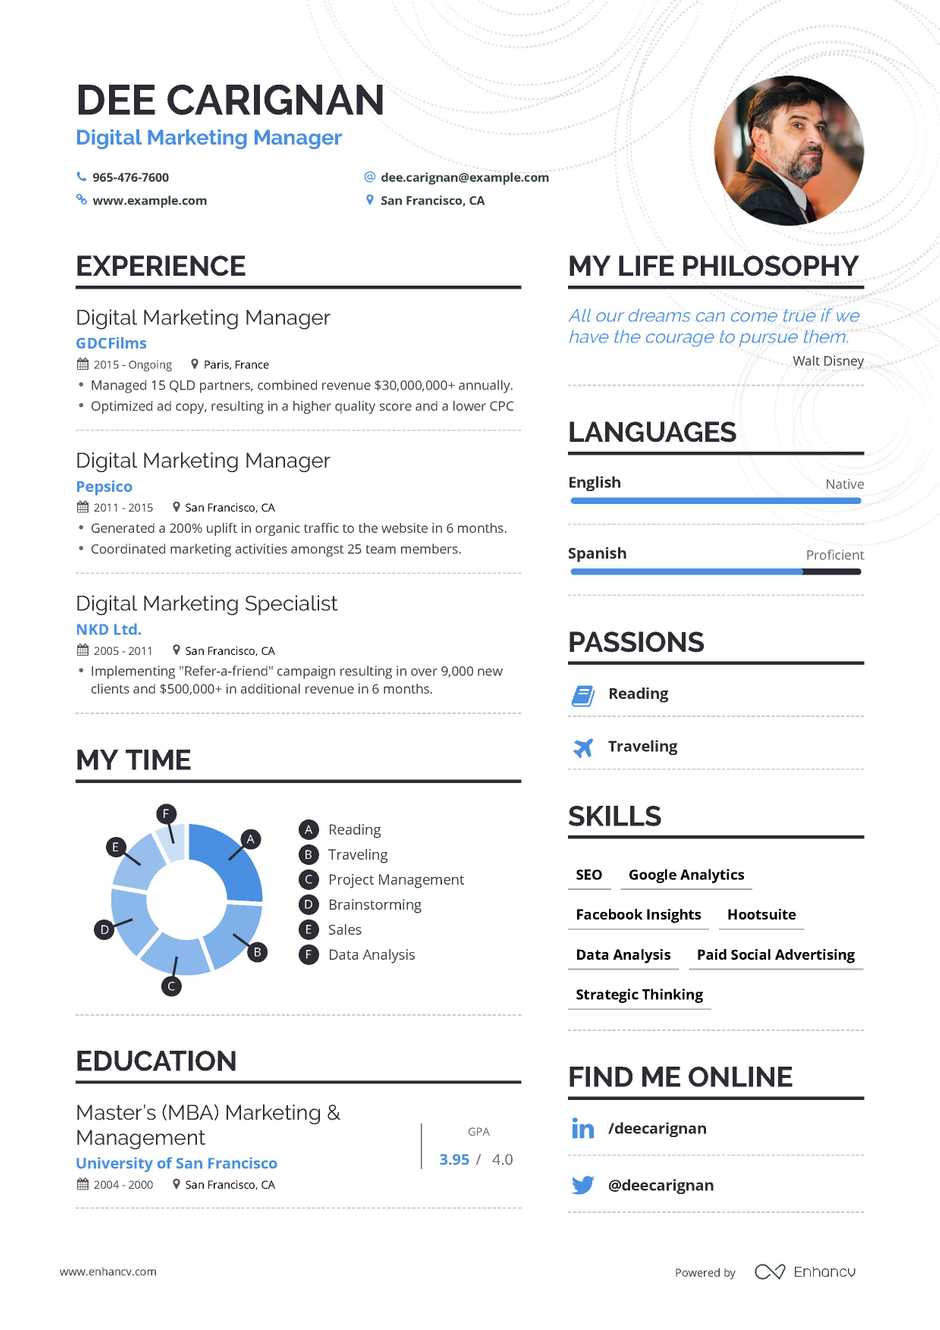 Digital marketing resume examples with expert tips